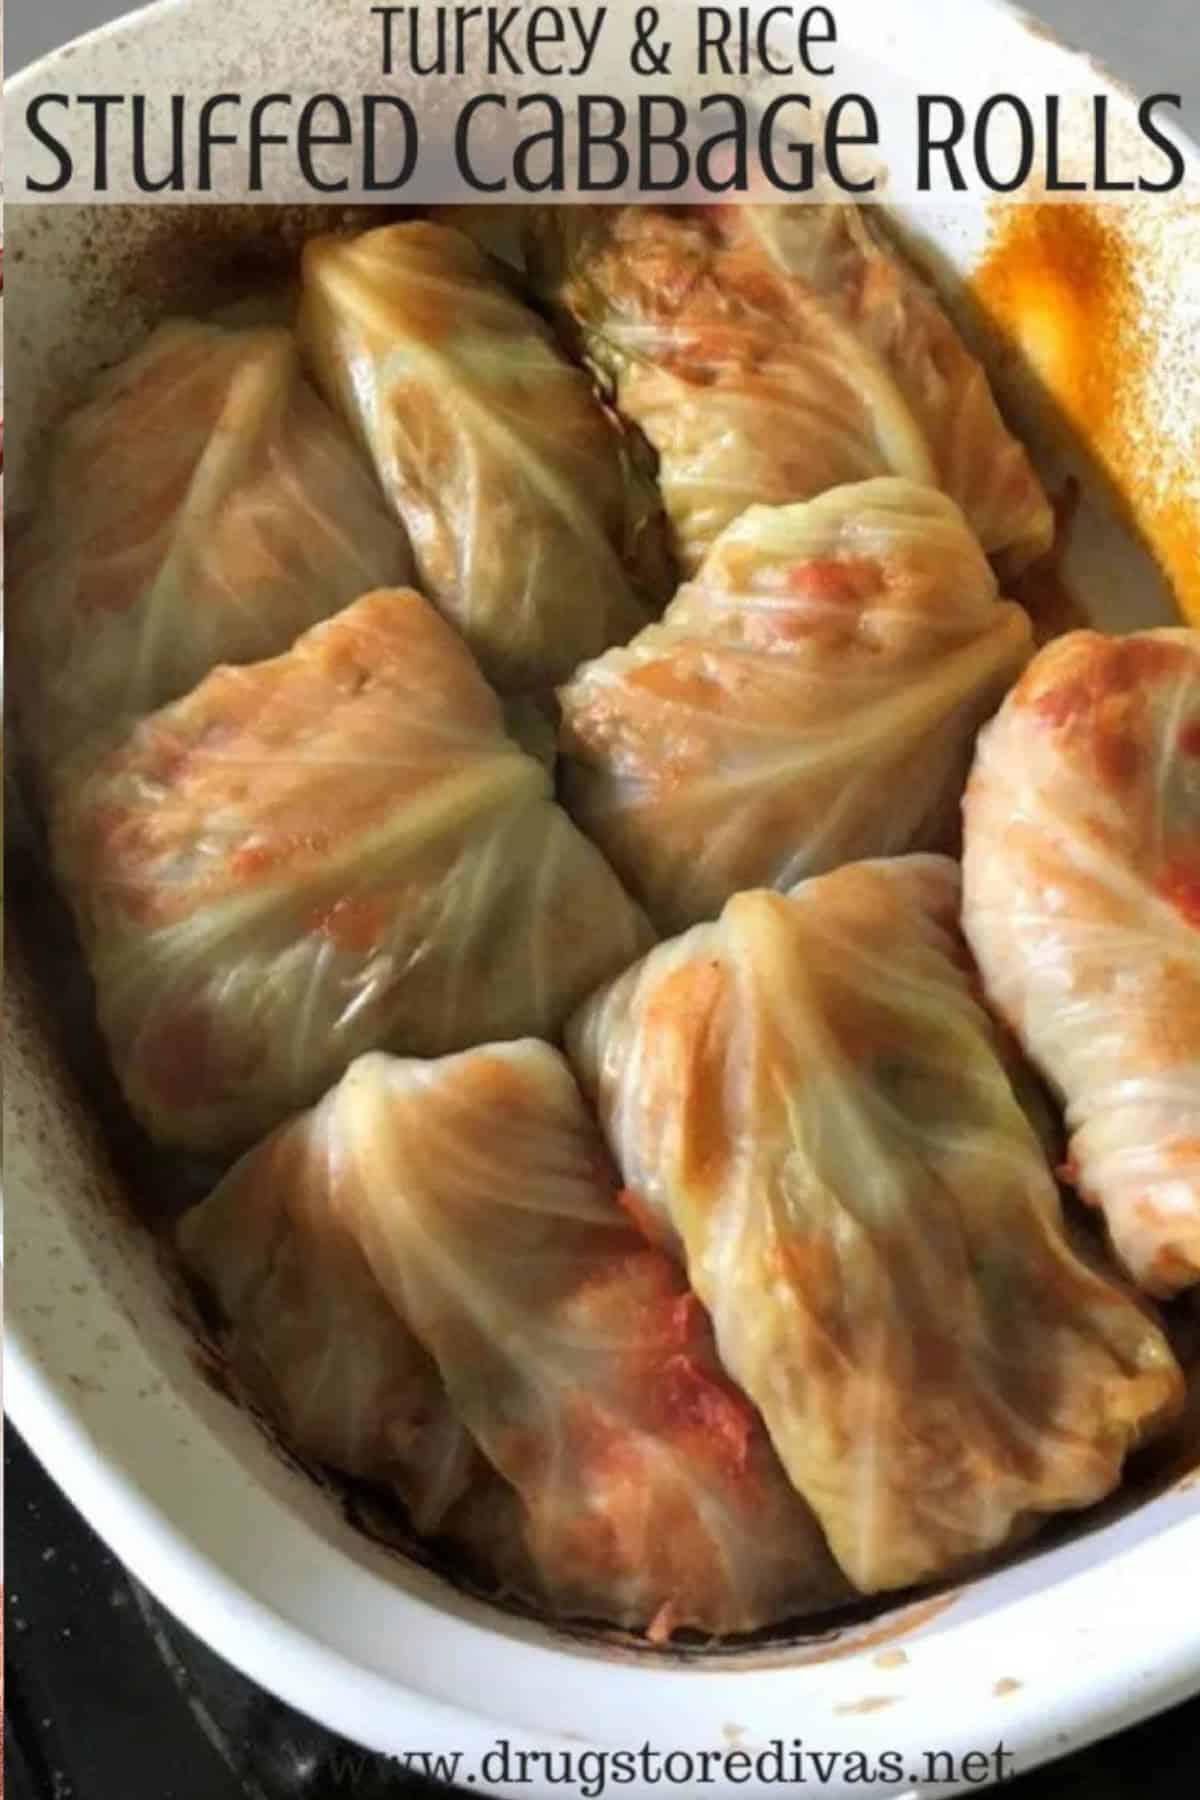 A bowl of stuffed cabbage rolls.